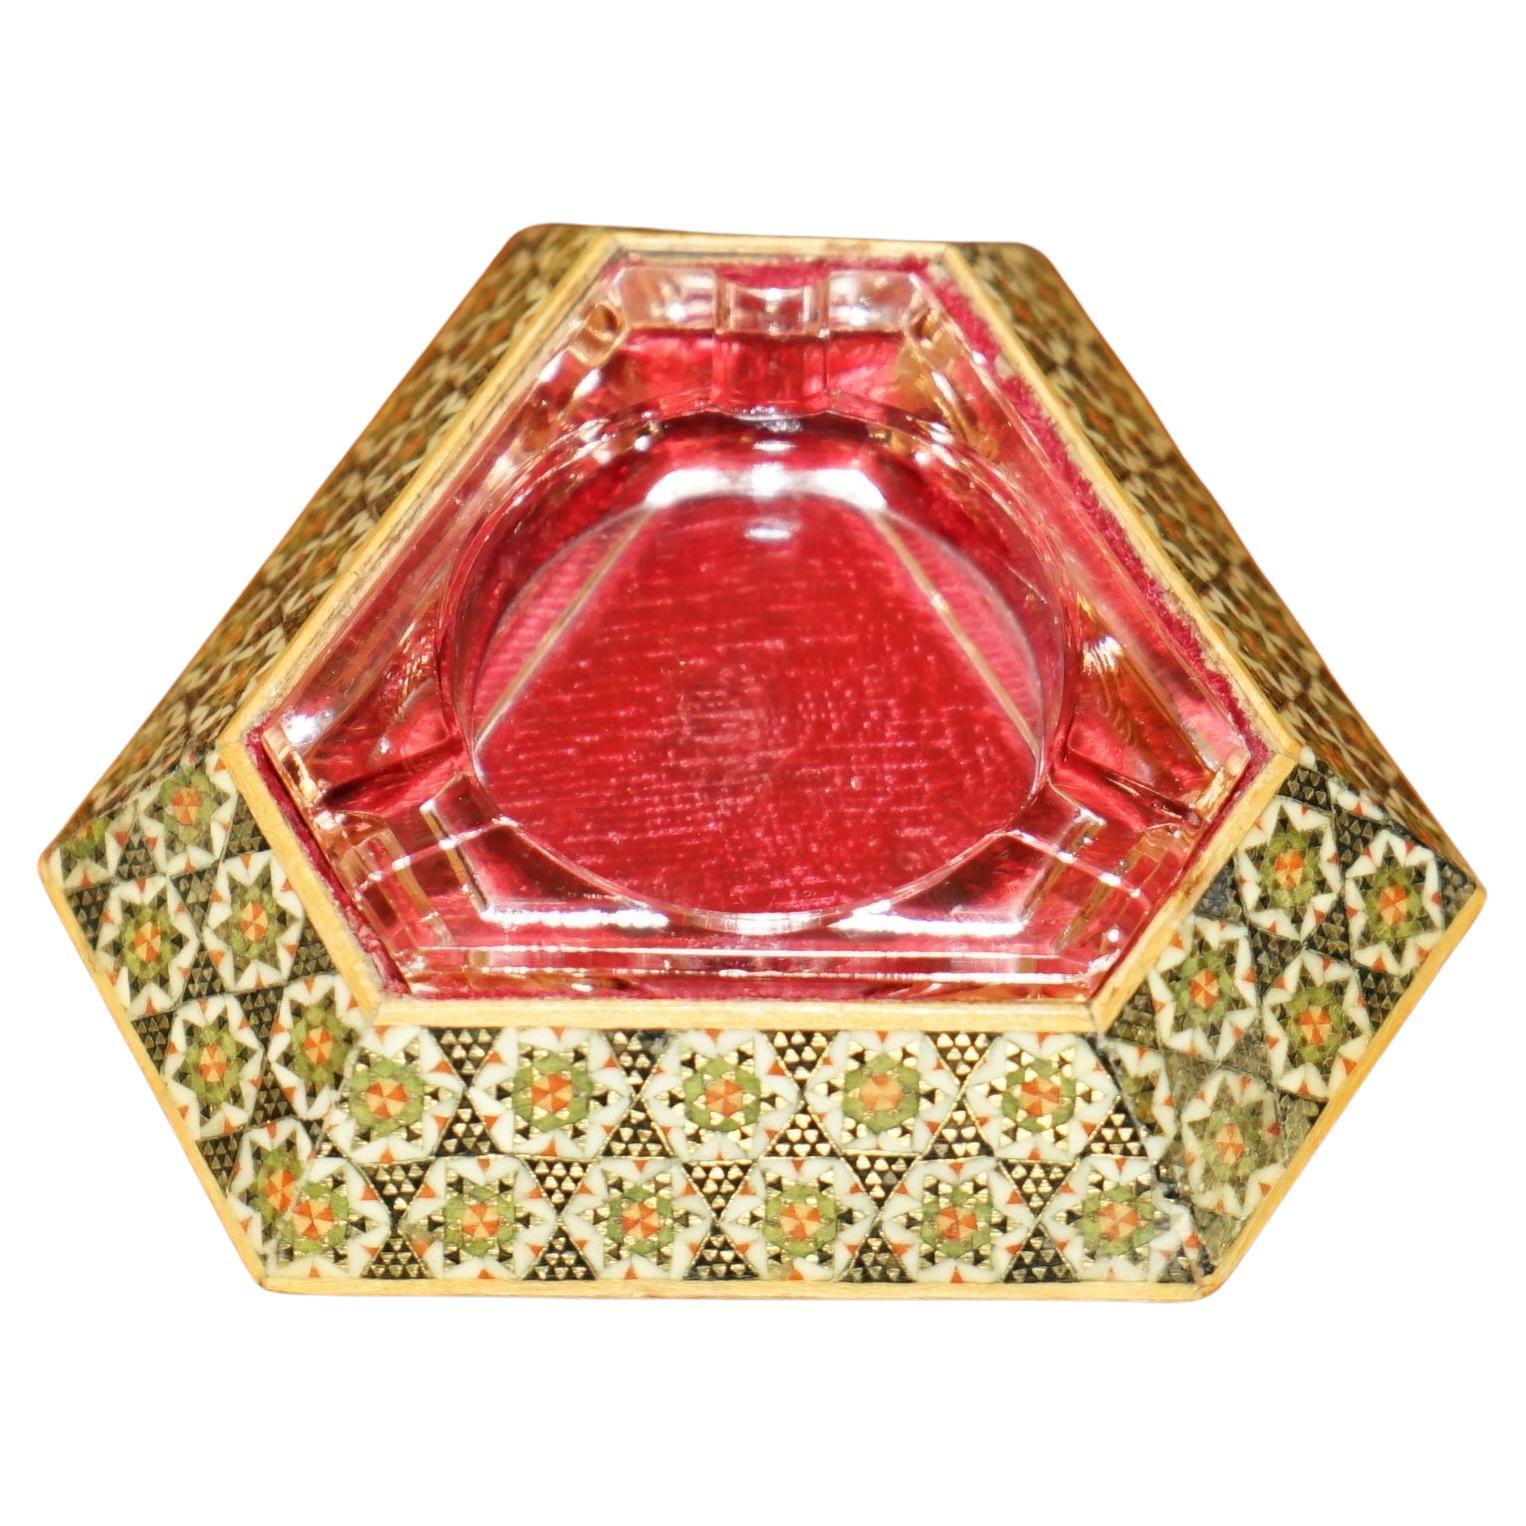 ANTIQUE PERSIAN ASHTRAY WiTH CRANBERRY GLASS TRIANGLE INTERNAL TRAY im Angebot